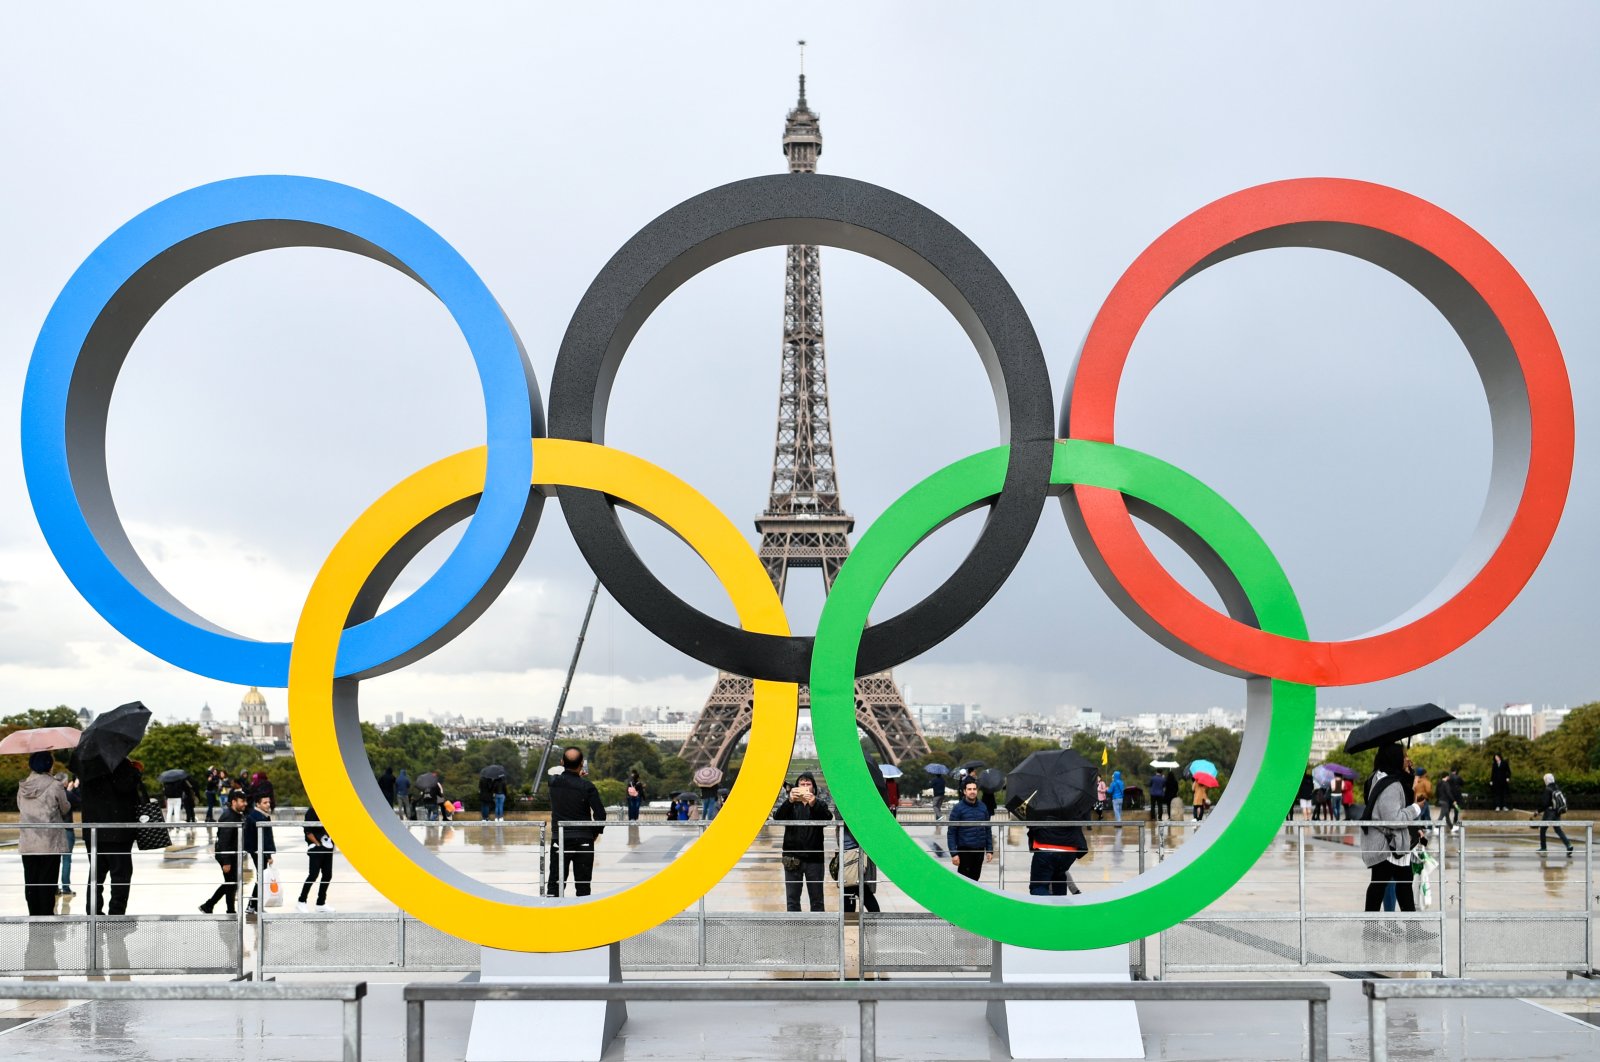 The Olympics Rings sit in a place of honor in front of the Eiffel Tower, Paris, France, Sept. 18, 2017. (Getty Images Photo)